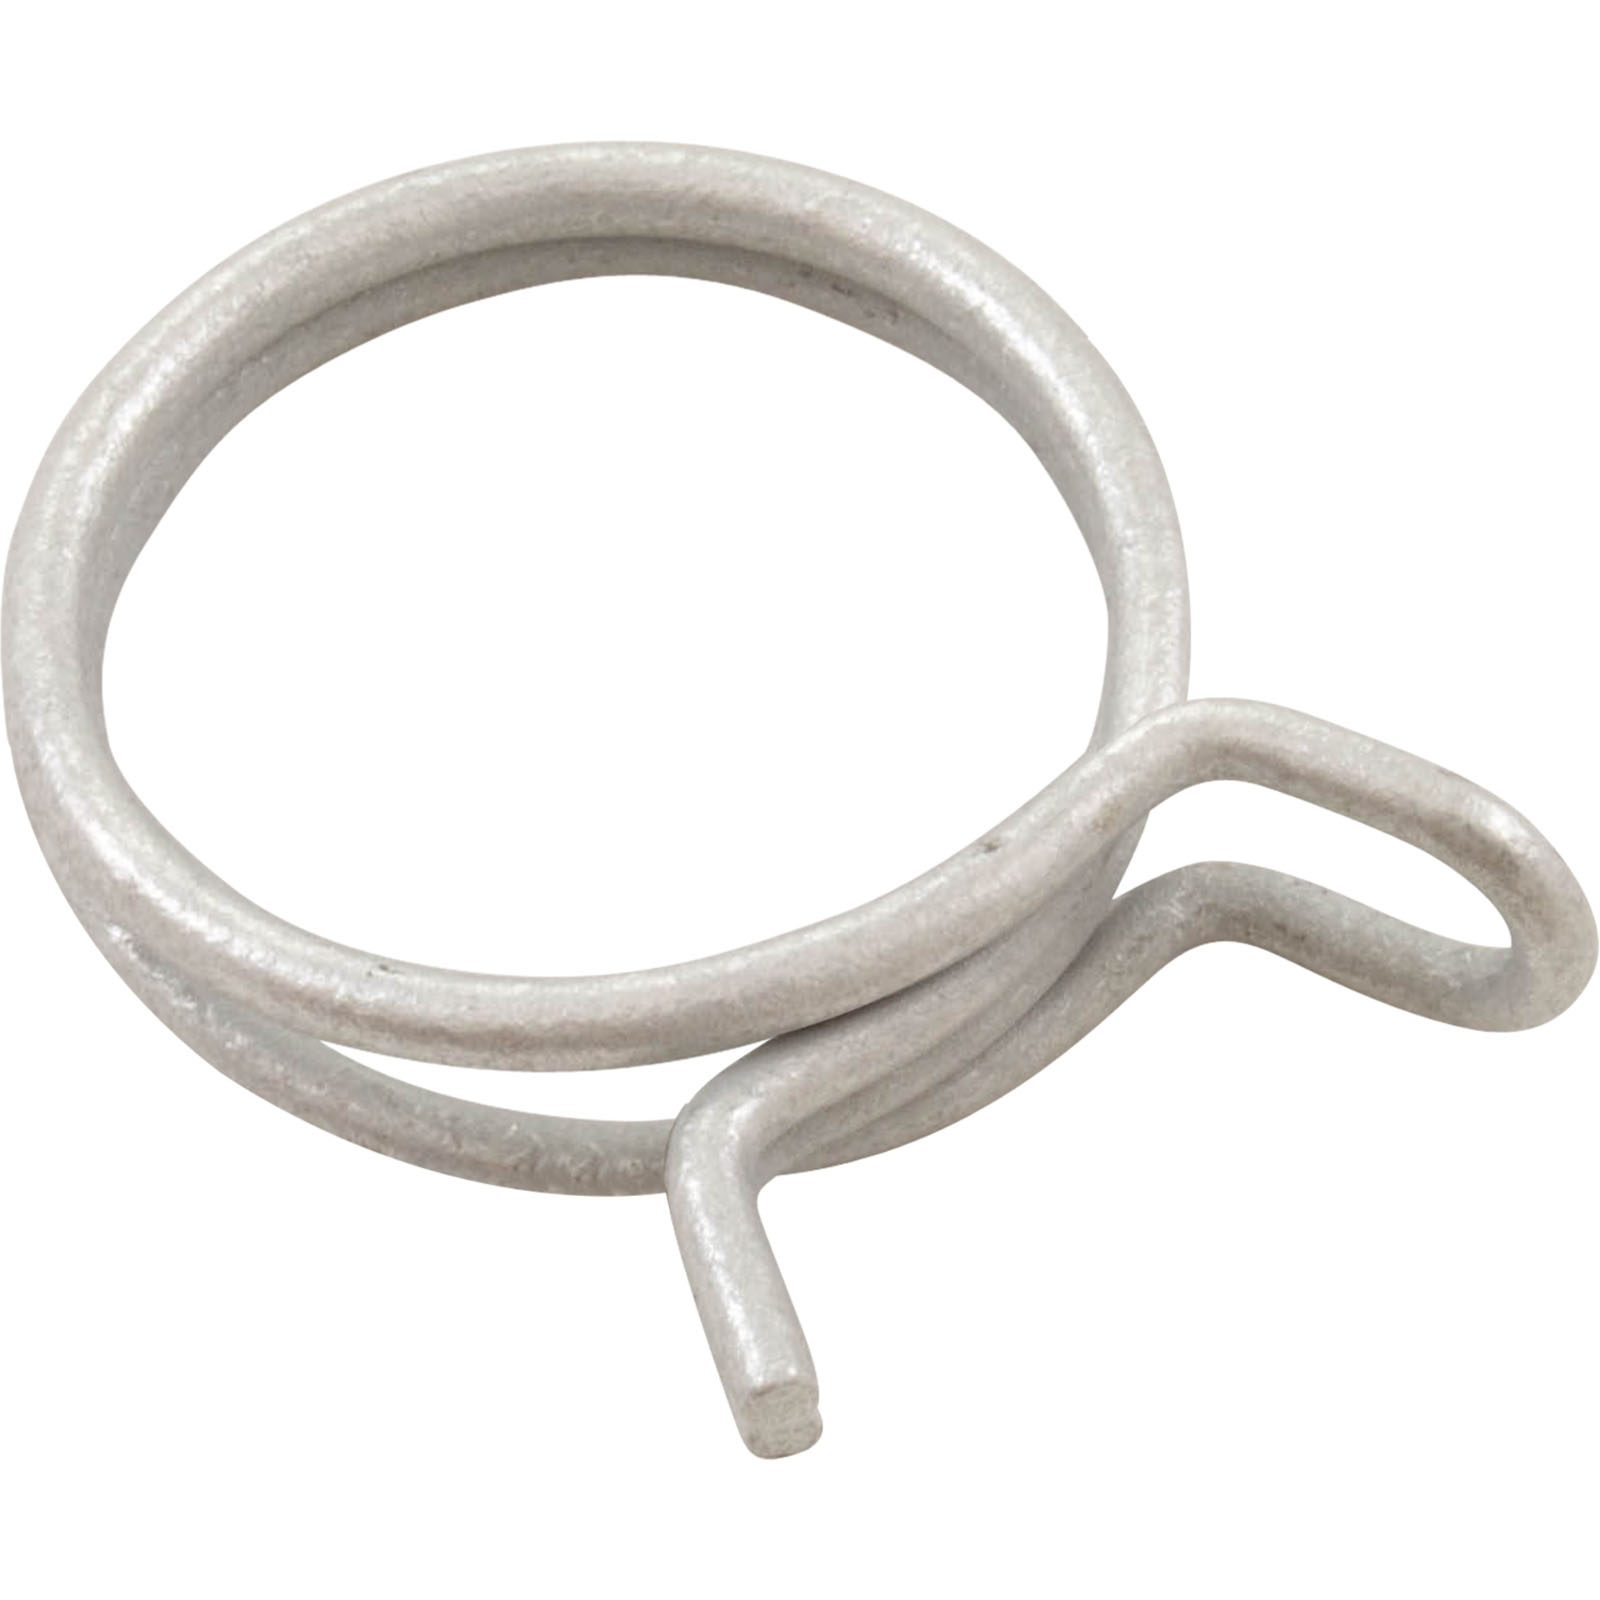 HOSE CLAMP DOUBLE WIRE#16 STEEL 3/4 (PKG OF 25) | DW-16ST ZD